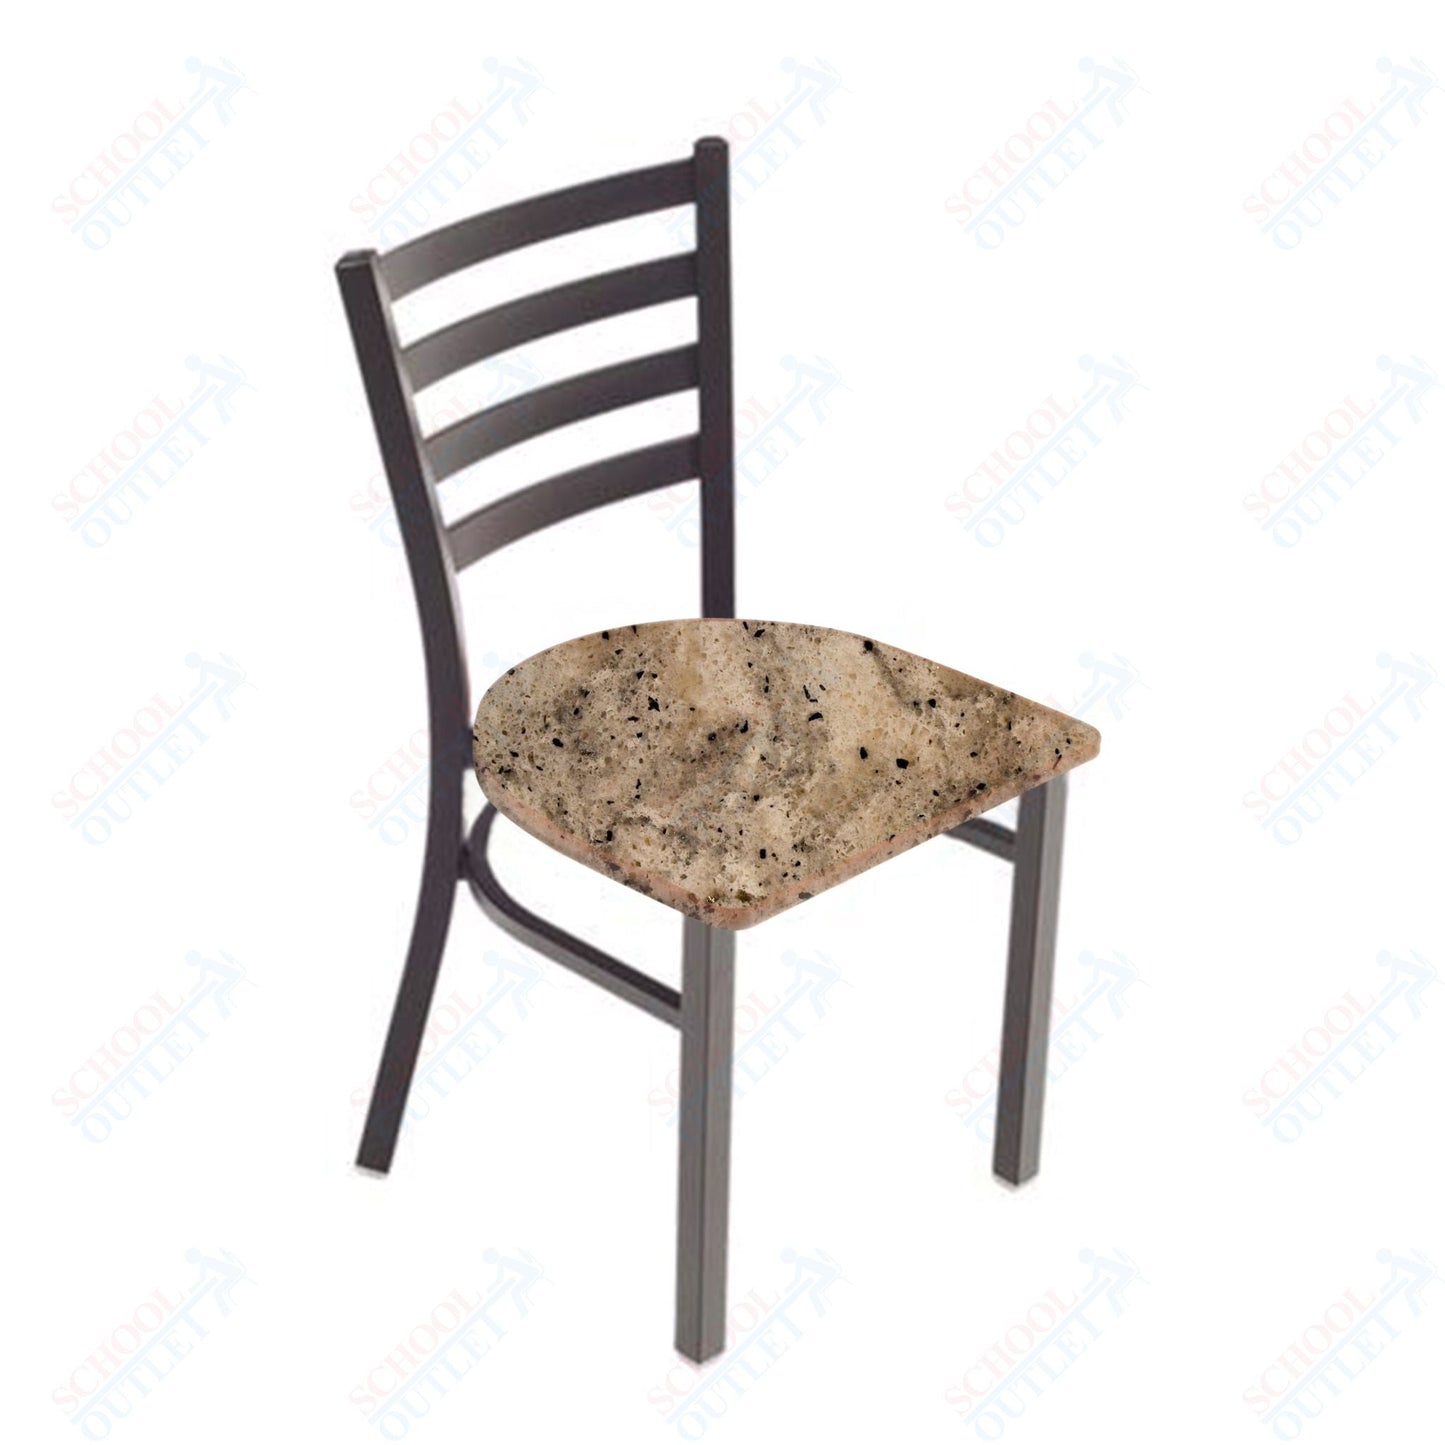 AmTab Cafe Chair - 16.5"W x 17"L x 32.25"H - Seat Height 17.25"H (AMT - CAFECHAIR - 4) - SchoolOutlet